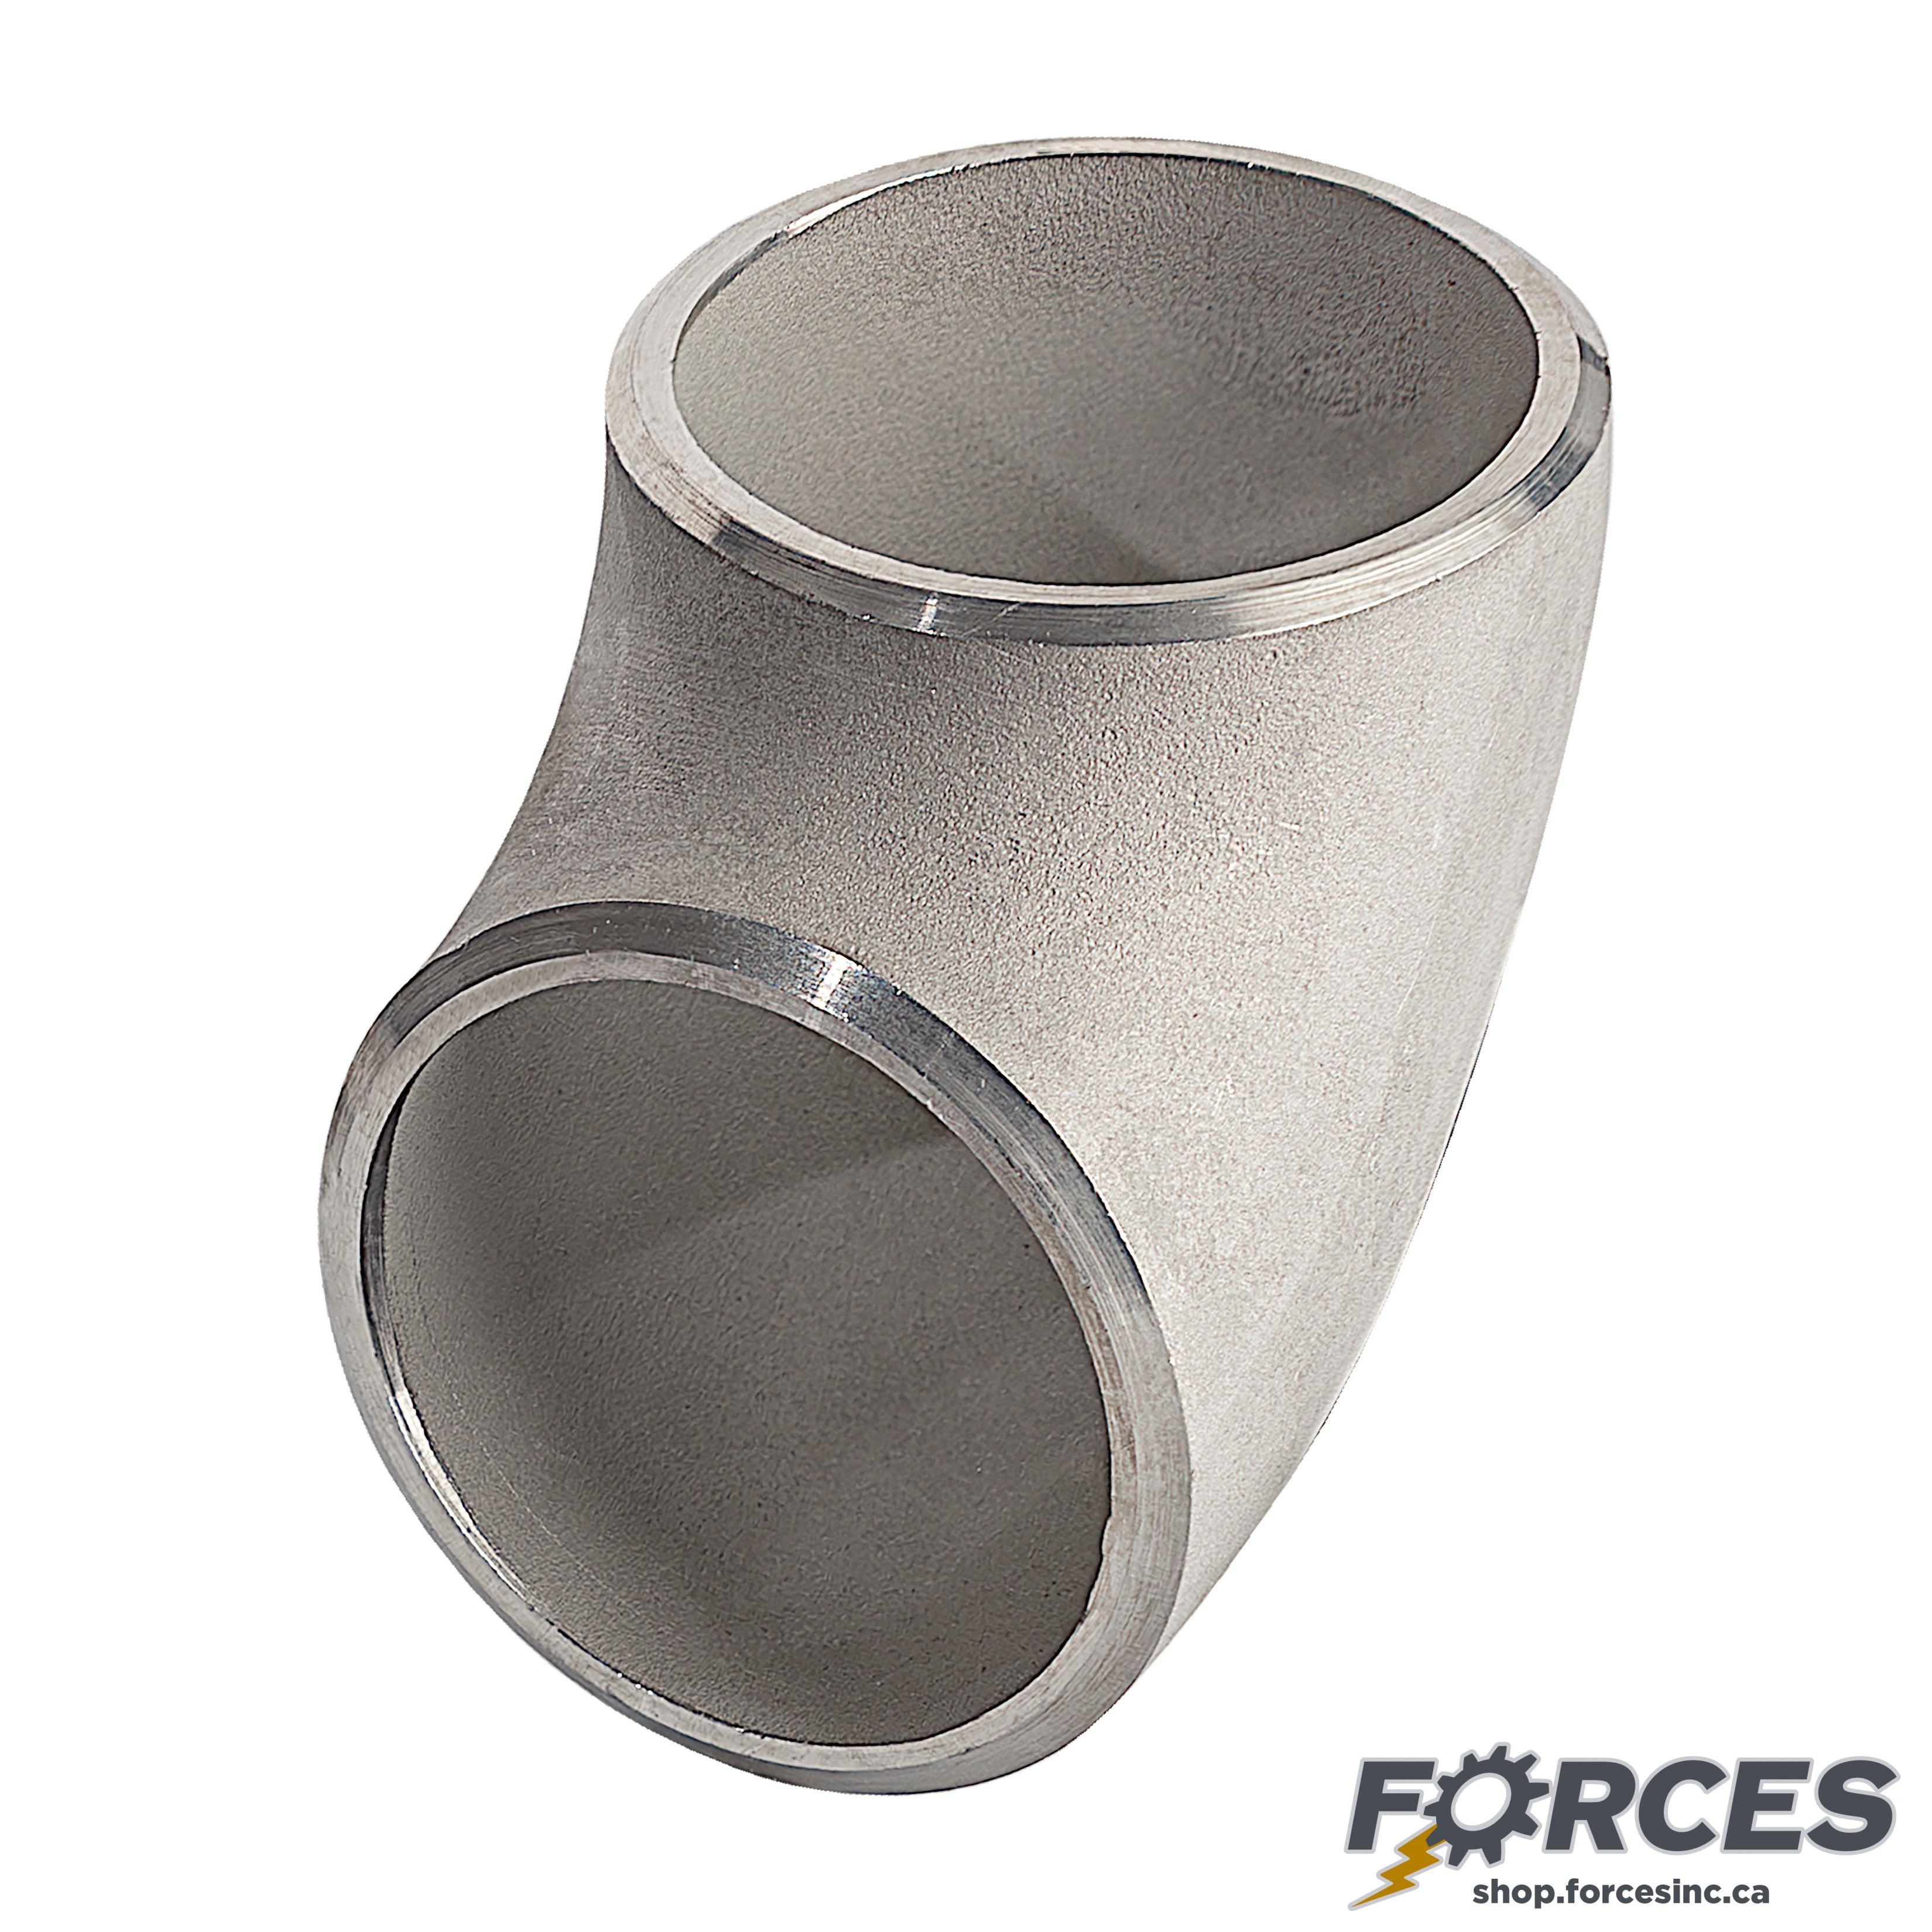 1/2" Elbow 45° SCH 40 Butt Weld - Stainless Steel 316 - Forces Inc